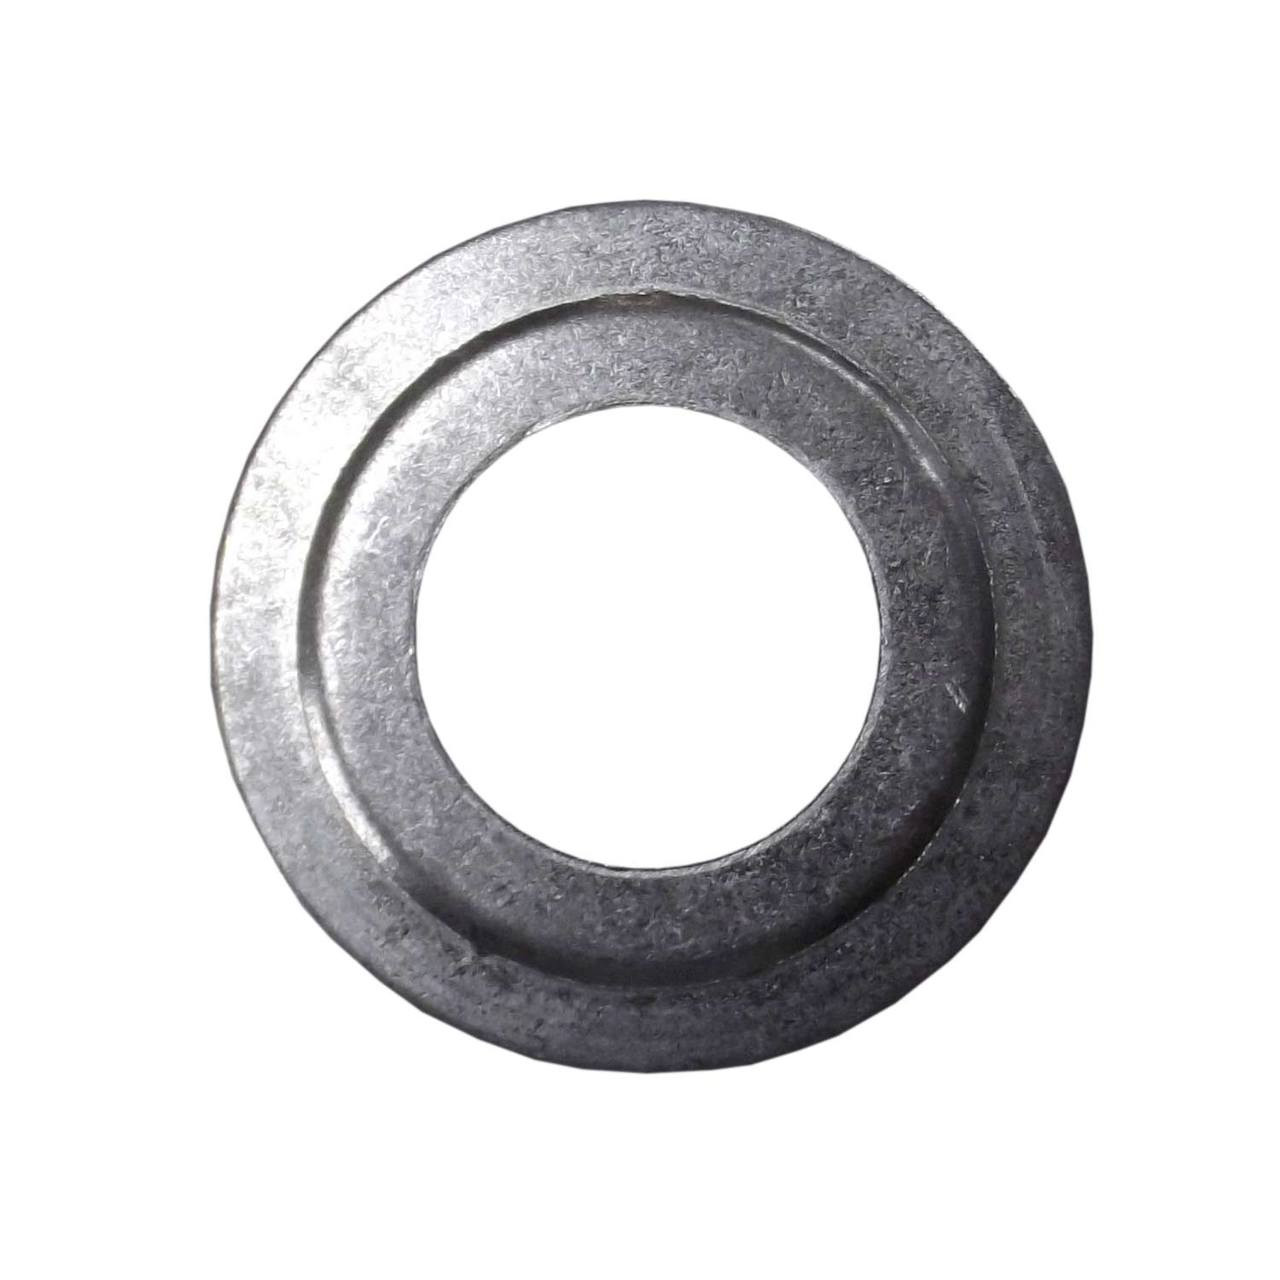 Appleton RW100-50 - 1" to 1/2" Cupped Reducing Washer